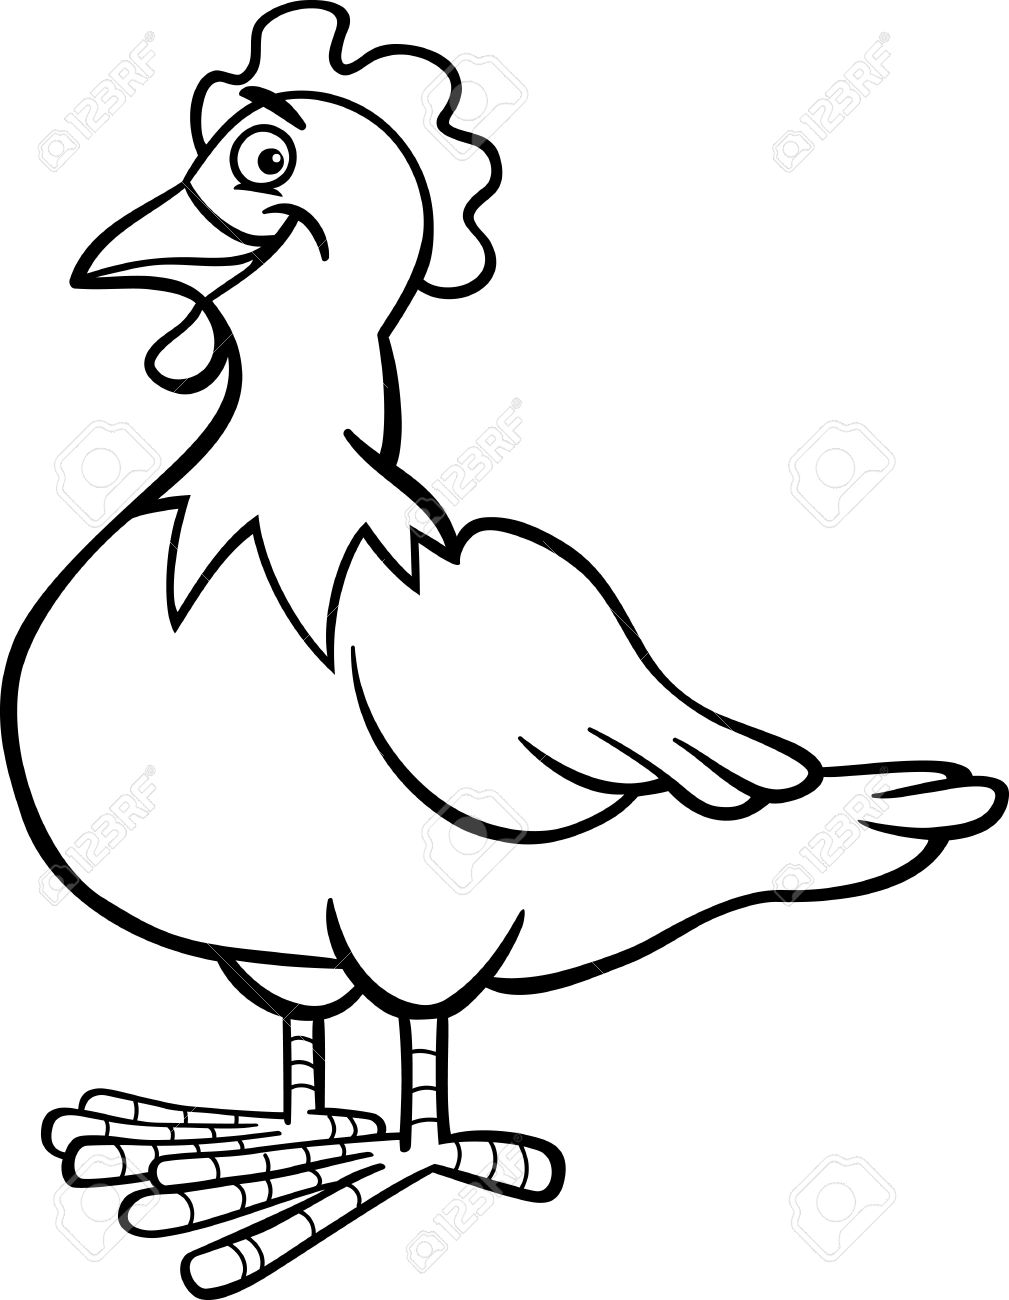 Chicken clipart black and .